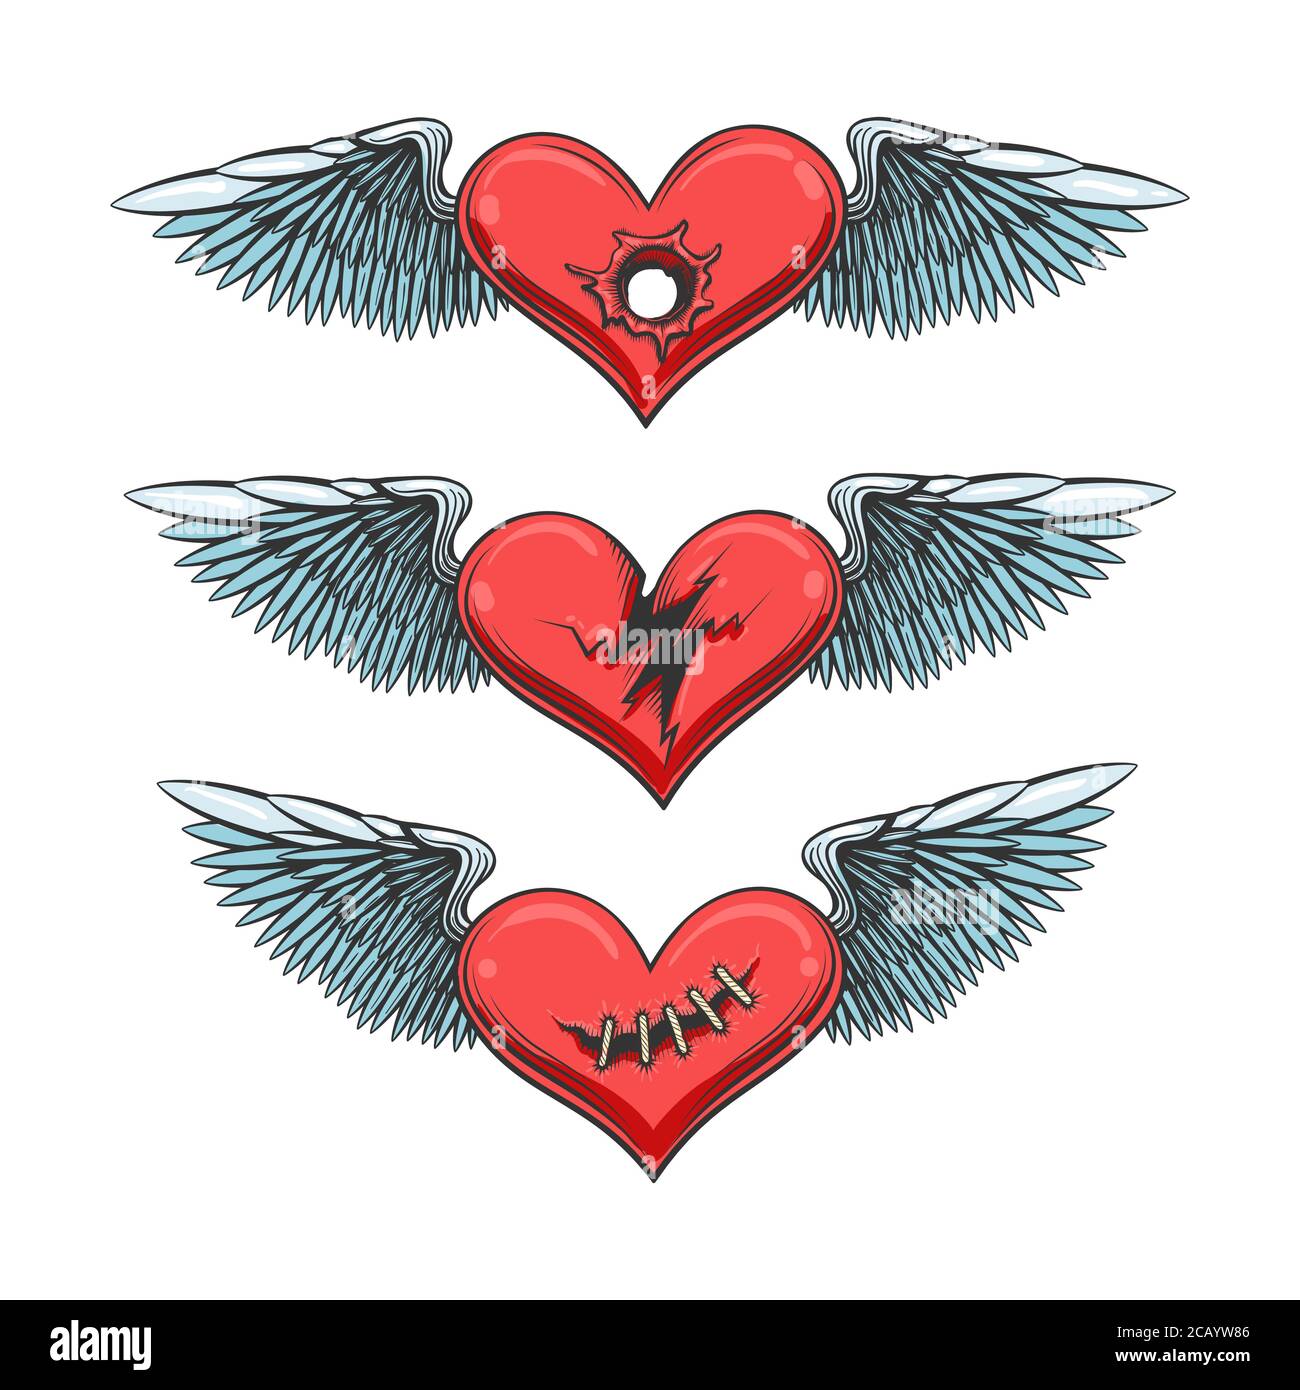 Winged Hearts Tattoo Set. love hurts concept. Torn, shot and stitched heart. Vector illustration. Stock Vector